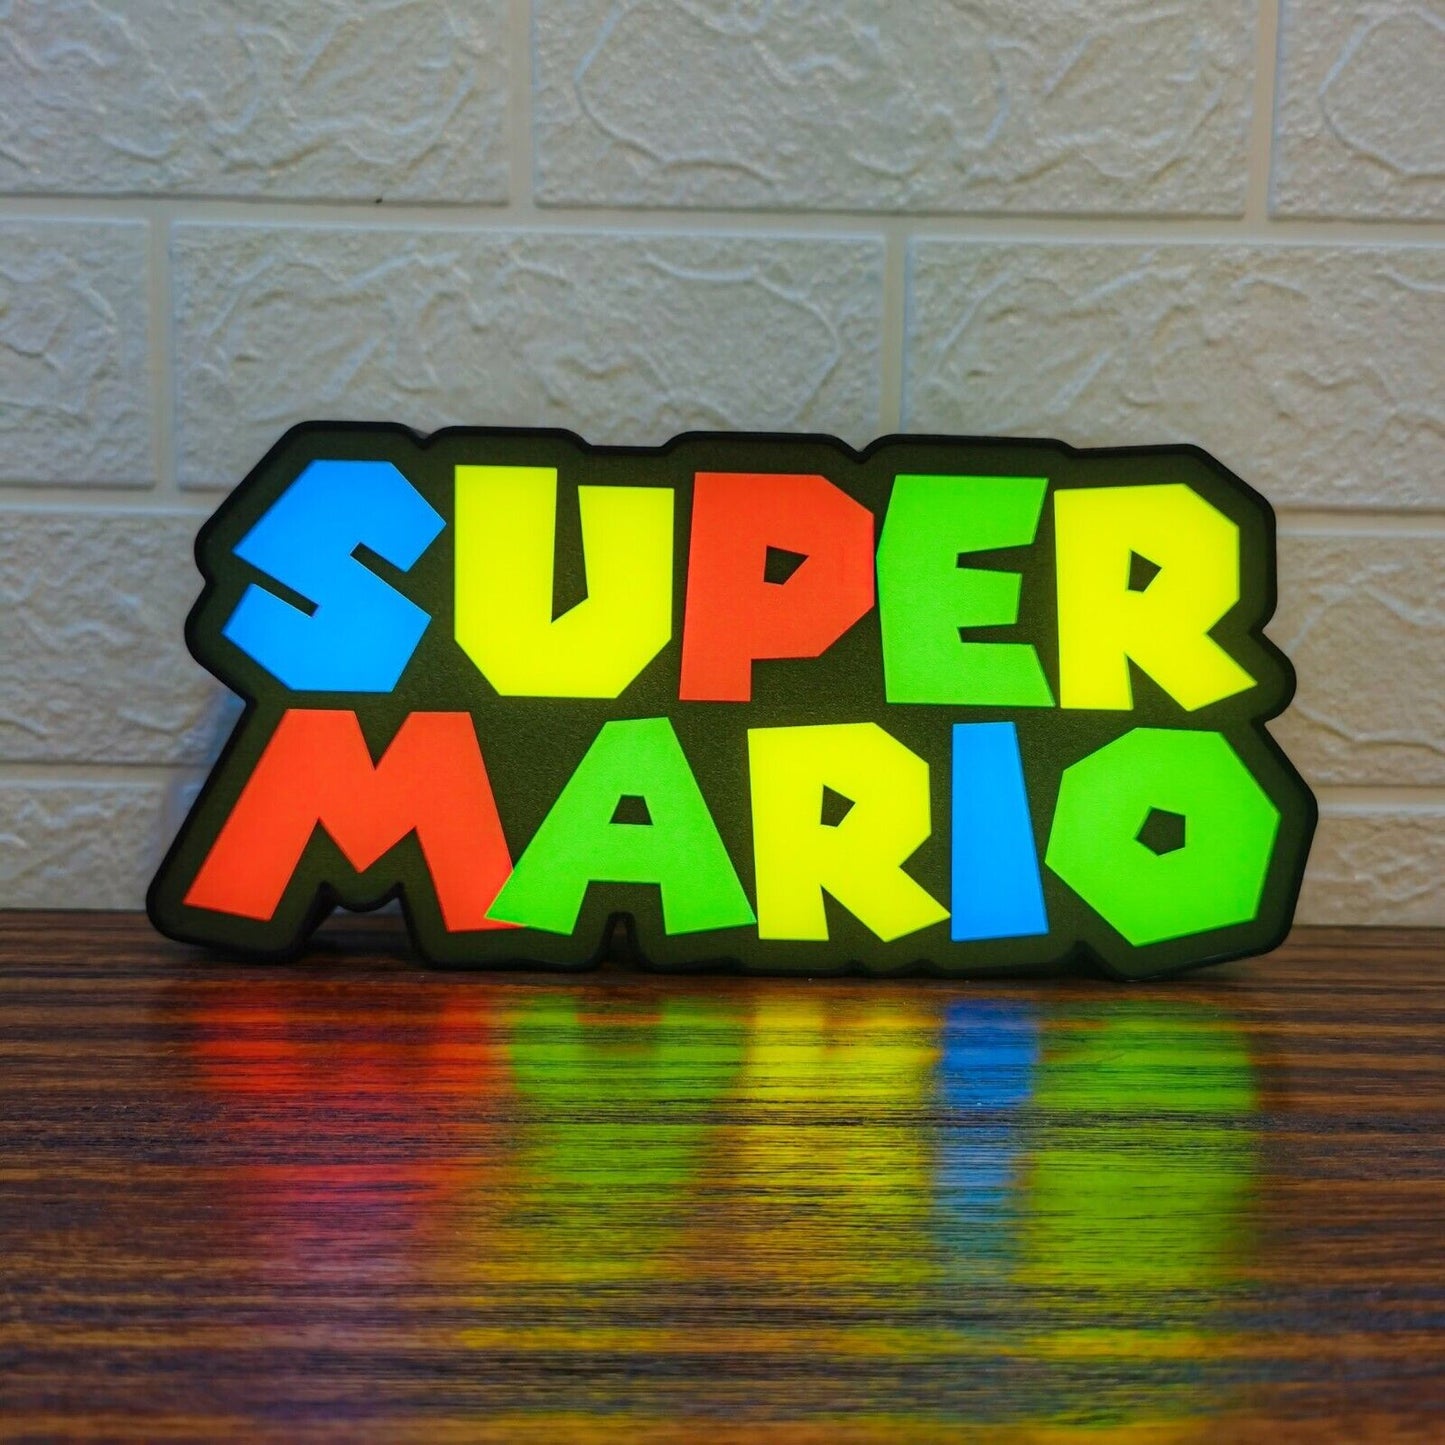 SNES Video Game Light Great for Gaming Room Decor Nintendo Sign for Man Cave Lights - FYLZGO Signs